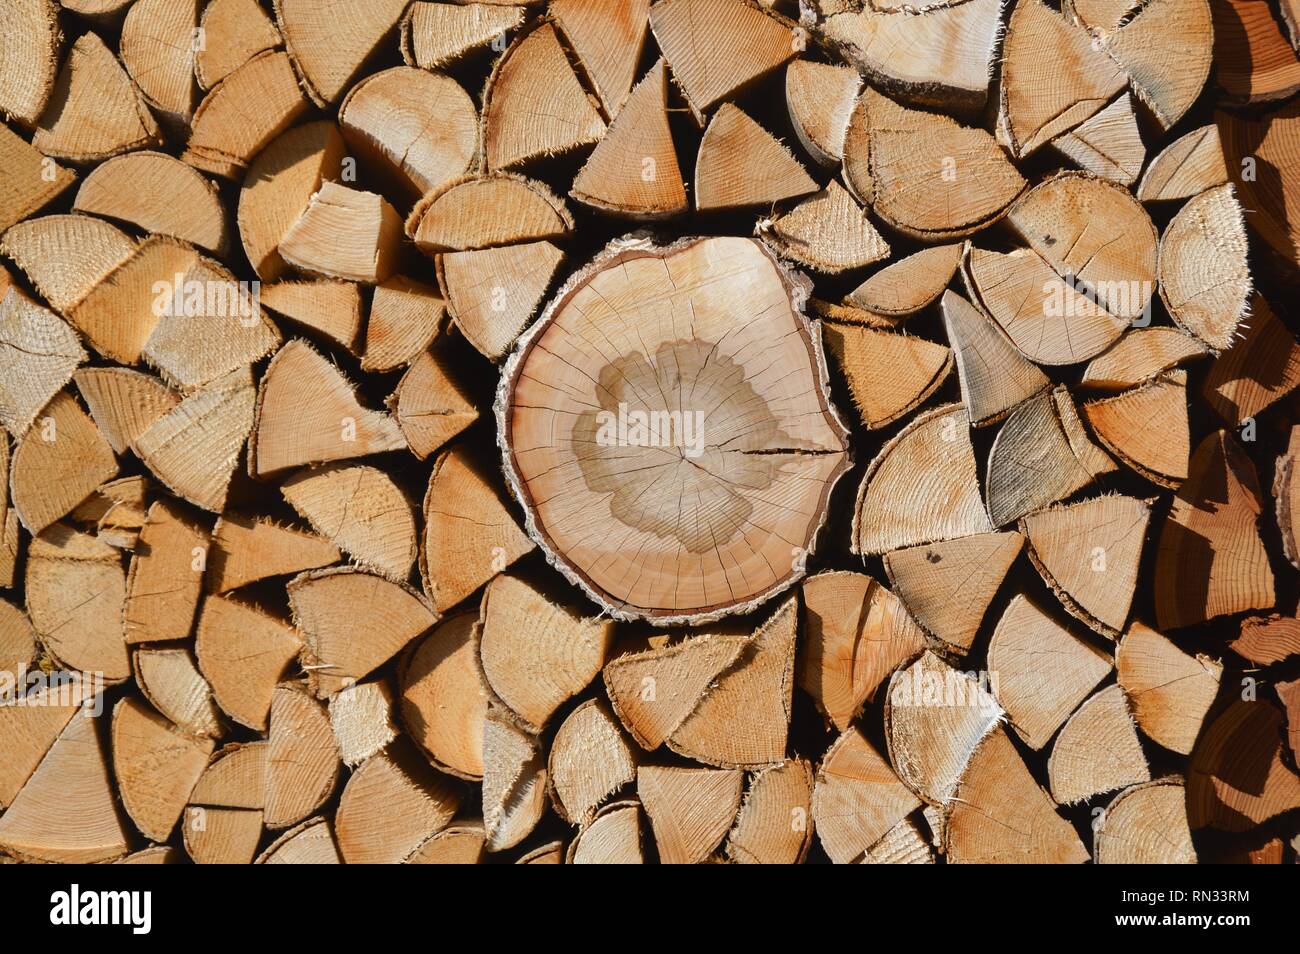 beautifully stacked firewood stored to dry Stock Photo